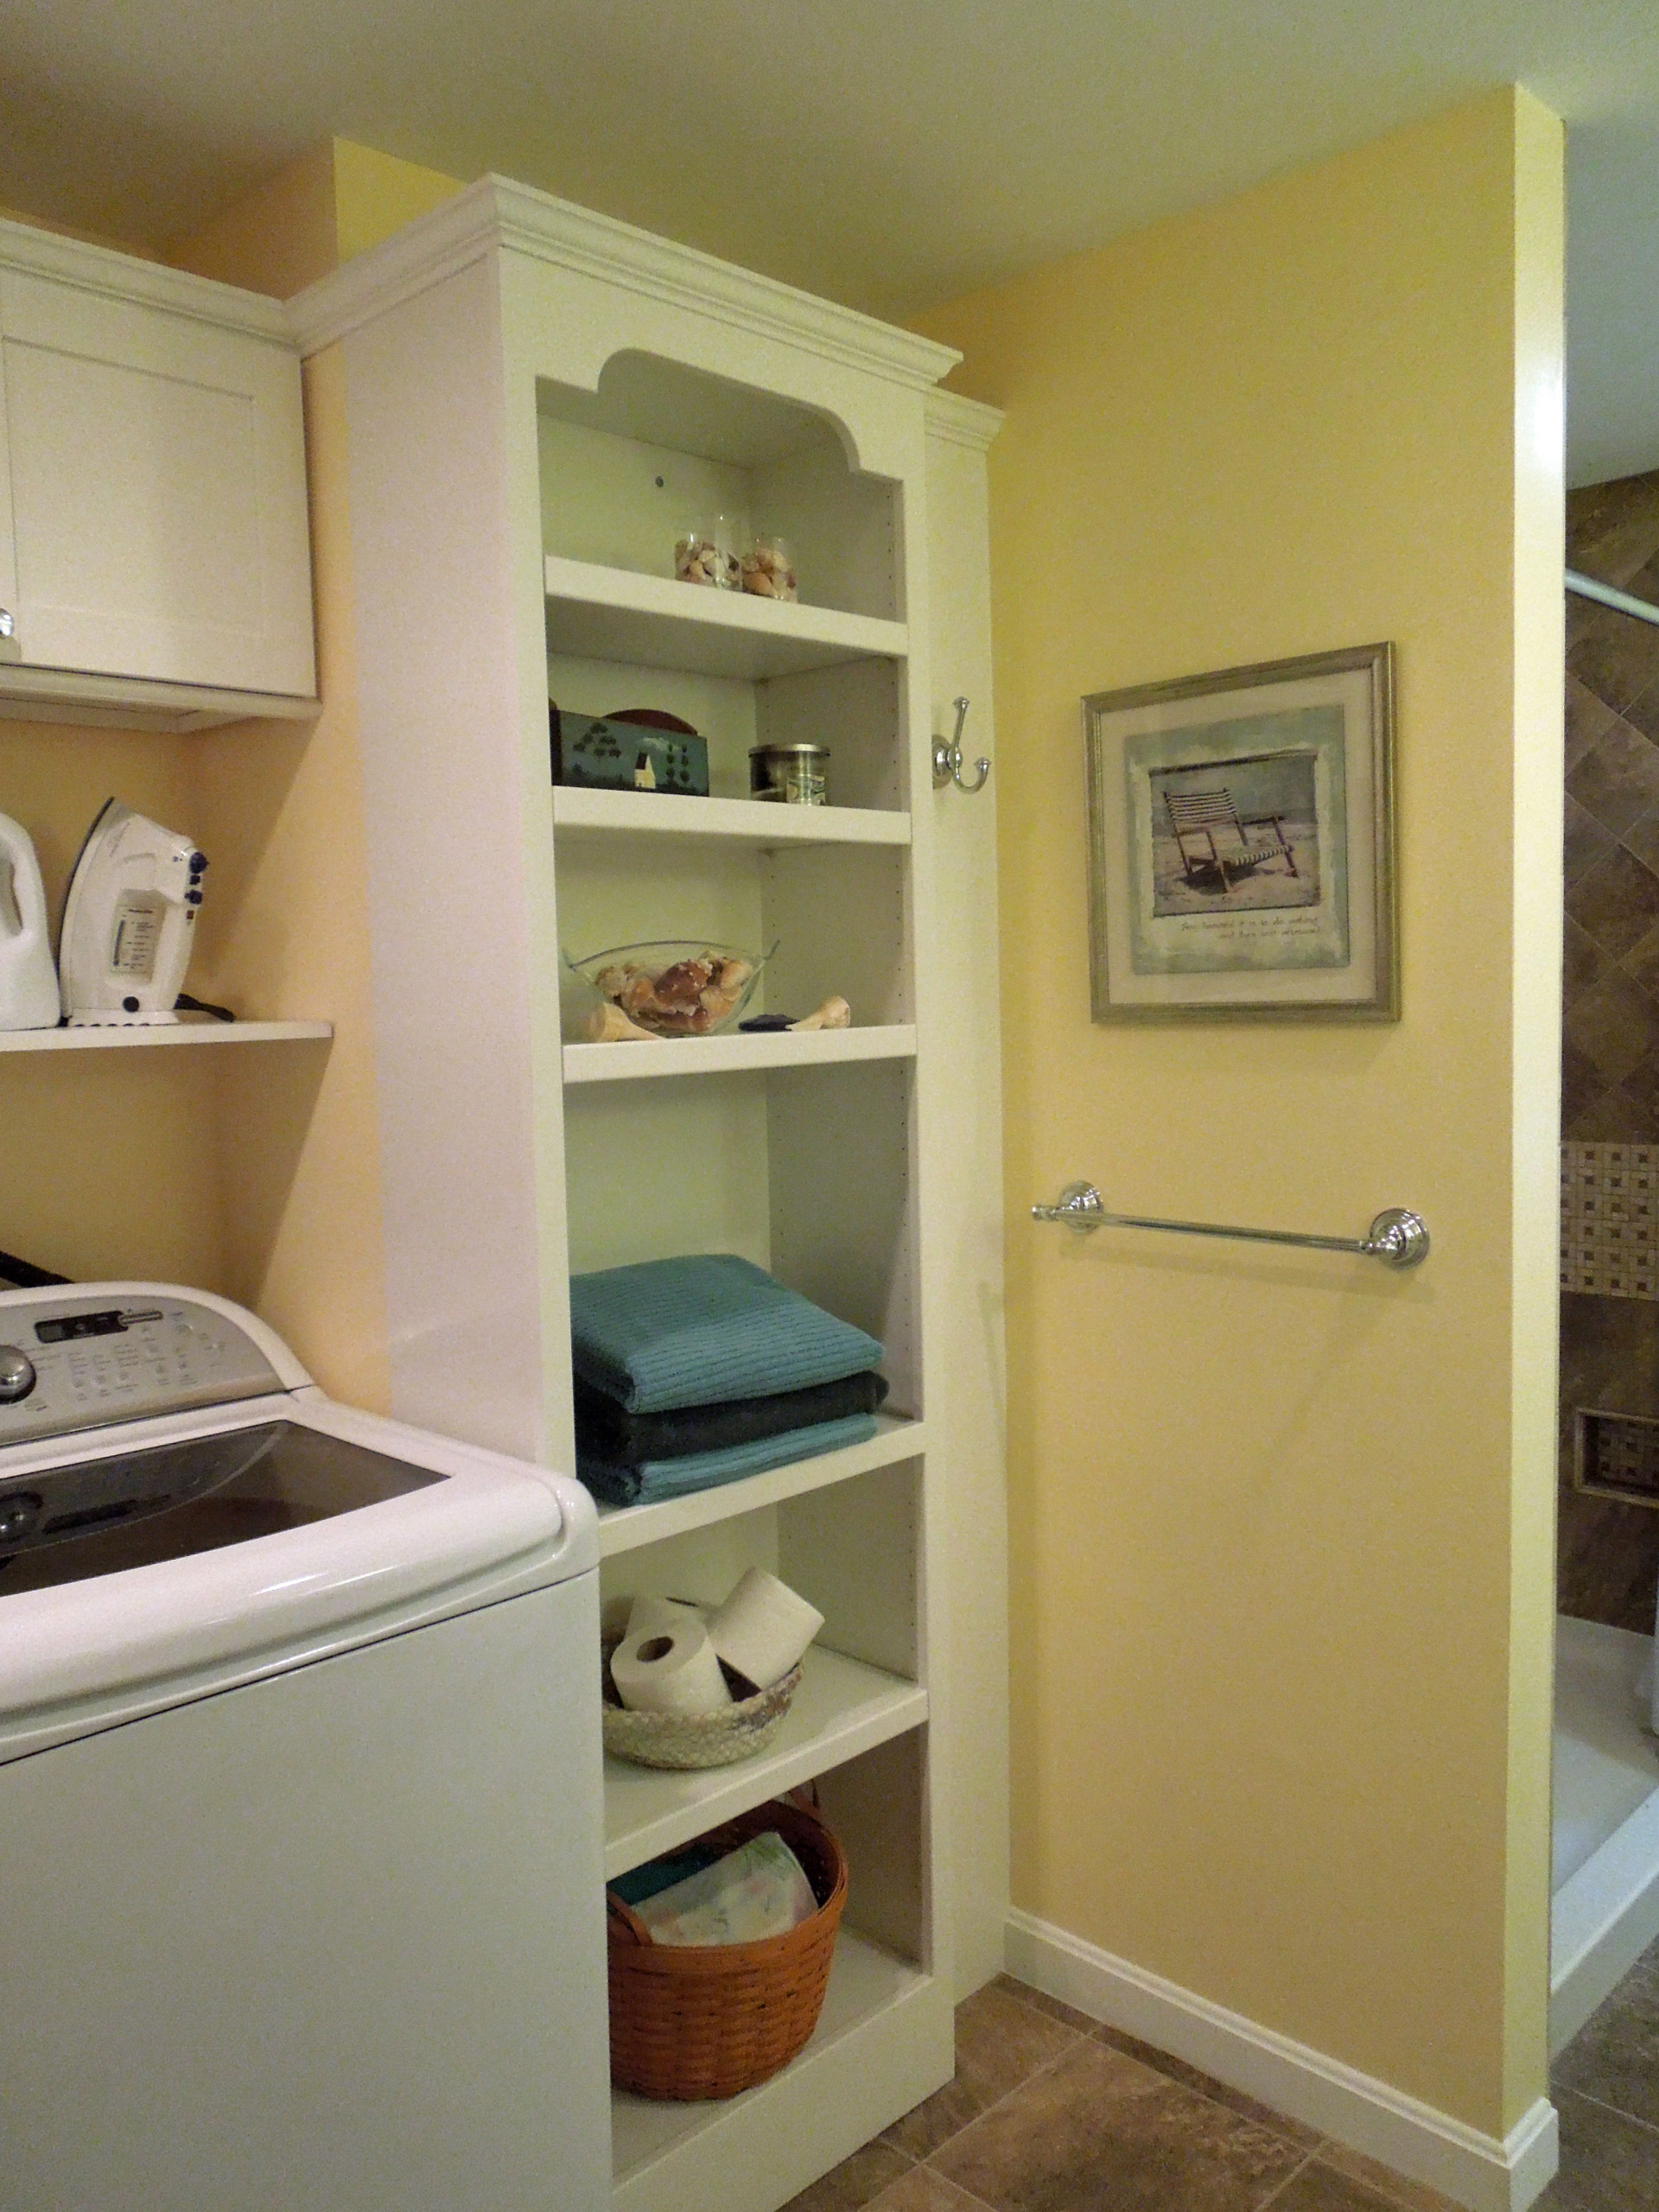 Sunny storage for a luxe laundry room and bath.